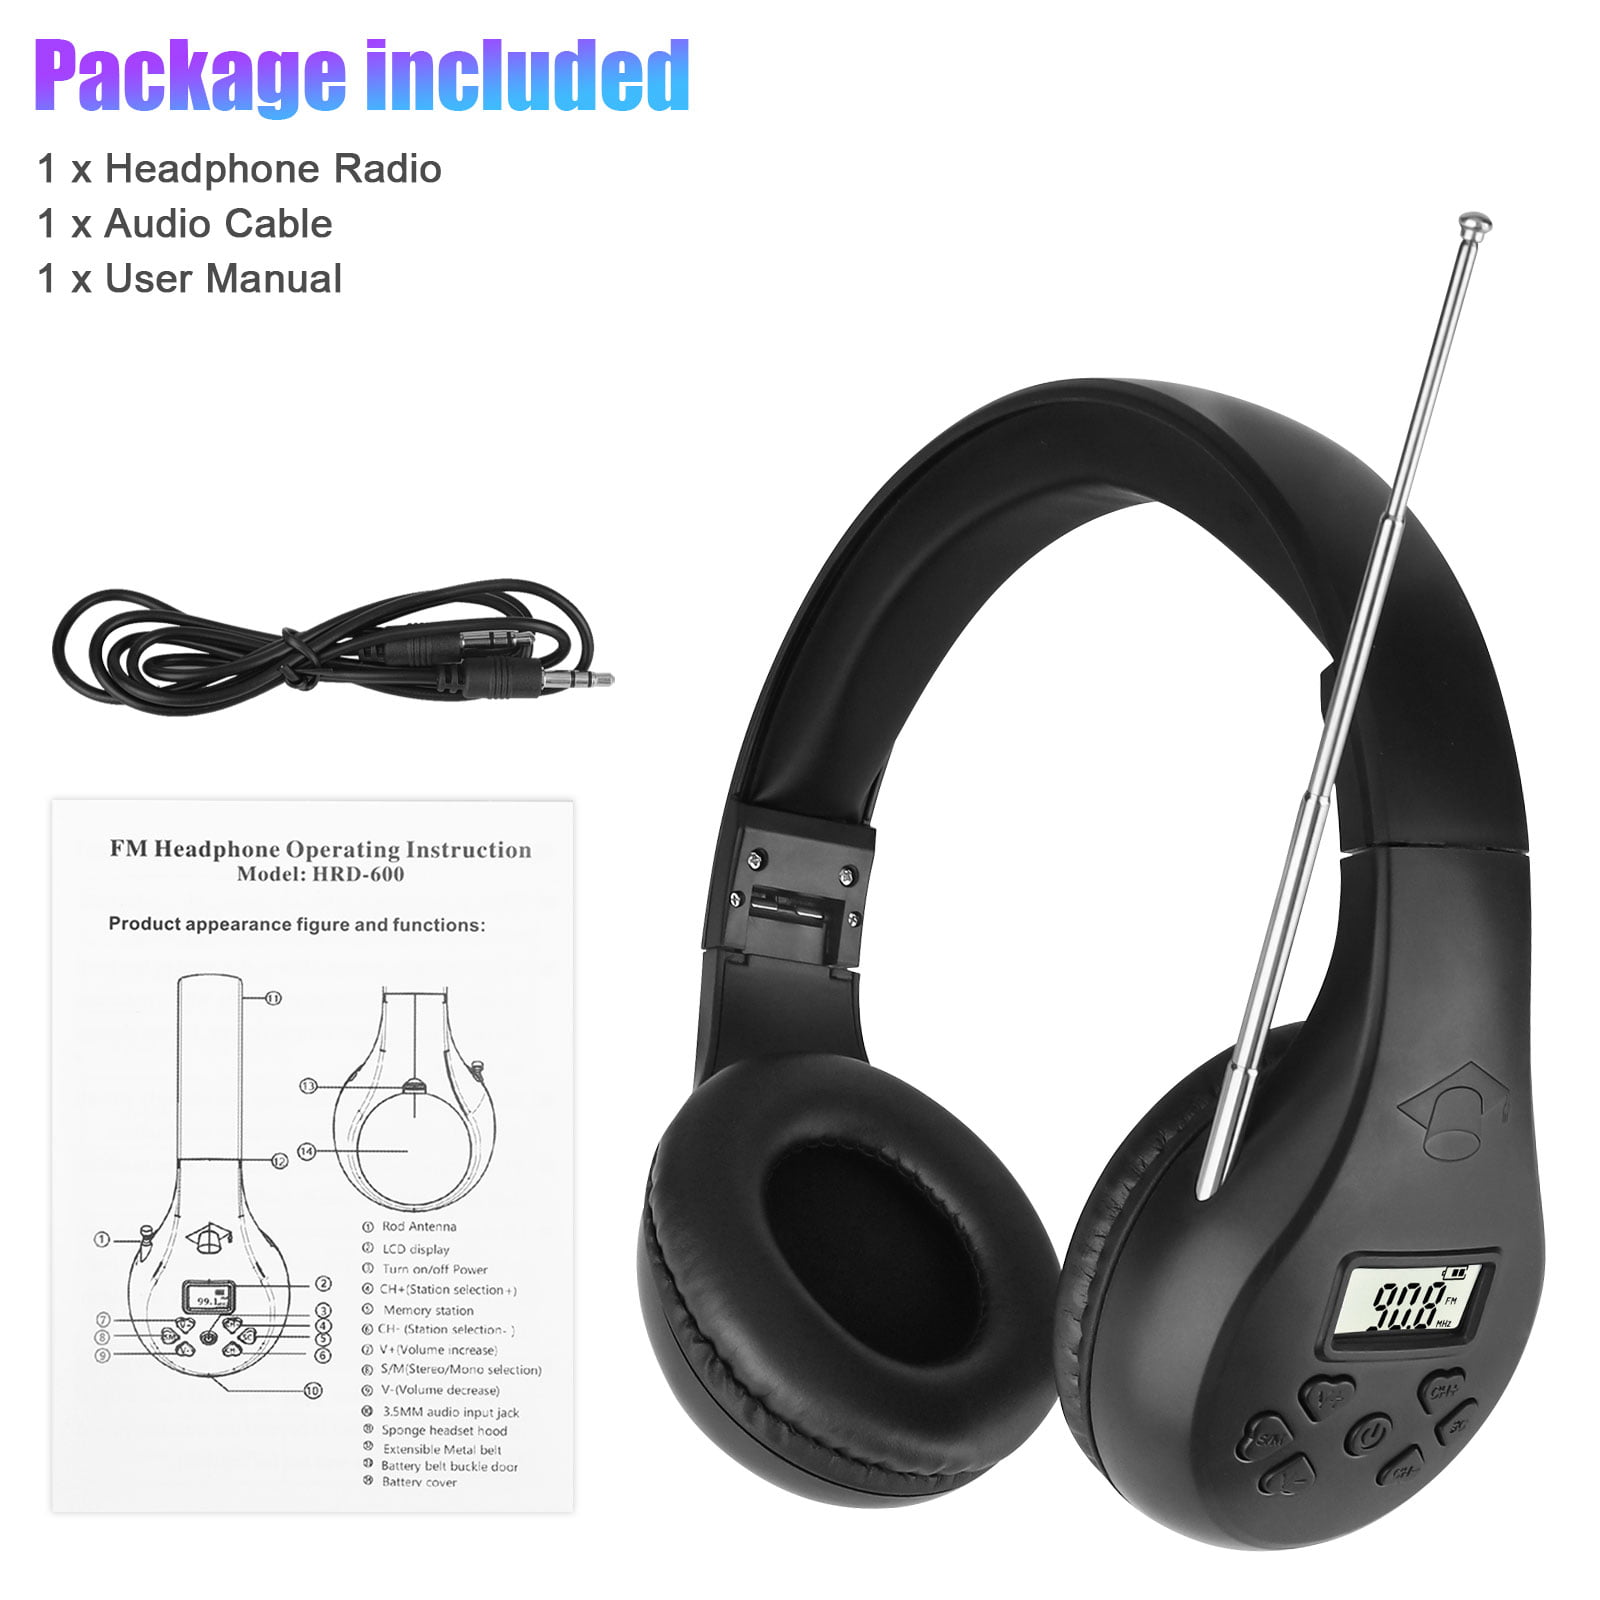 I modsætning til beholder overliggende Portable Stereo FM Radio Headphones with Best Reception, Digital FM Radio  Wireless Headset with Soft Ear Muffs, 3.5mm Aux for Walking, Jogging,  Riding, Mowing, Powered by 2 AA Batteries (Not Included) -